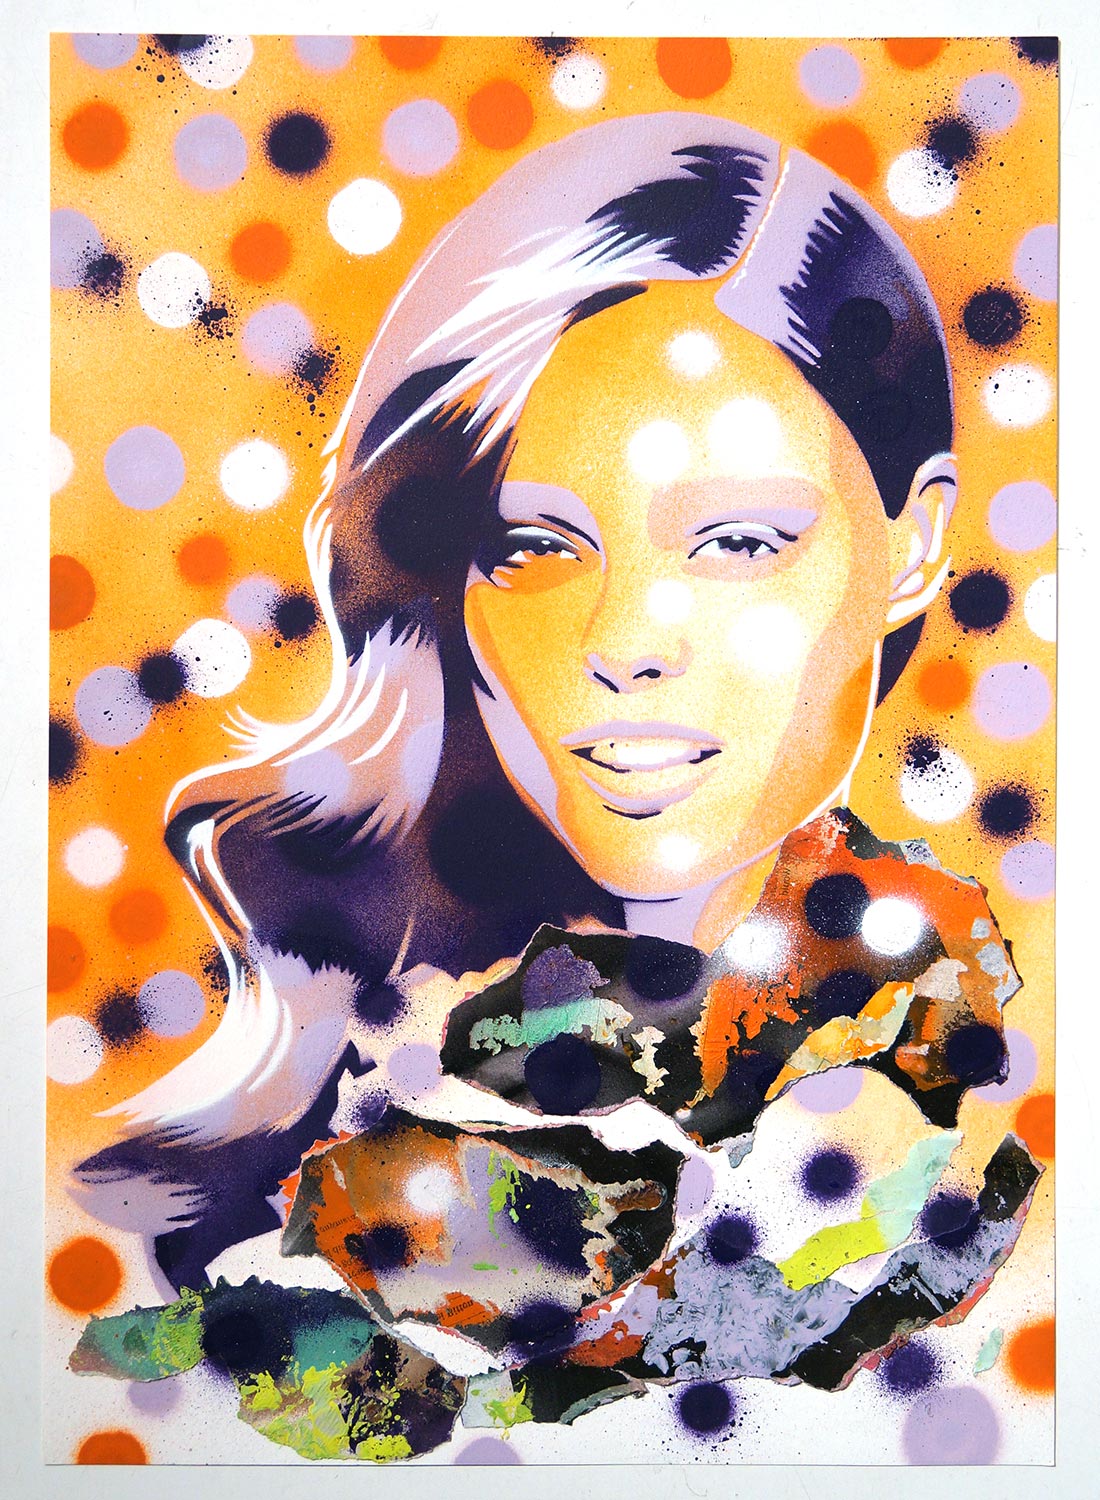 Mariestyle: "Flowery Cover Coco"  - spraypaint stencil on paper  - SALZIGBerlin